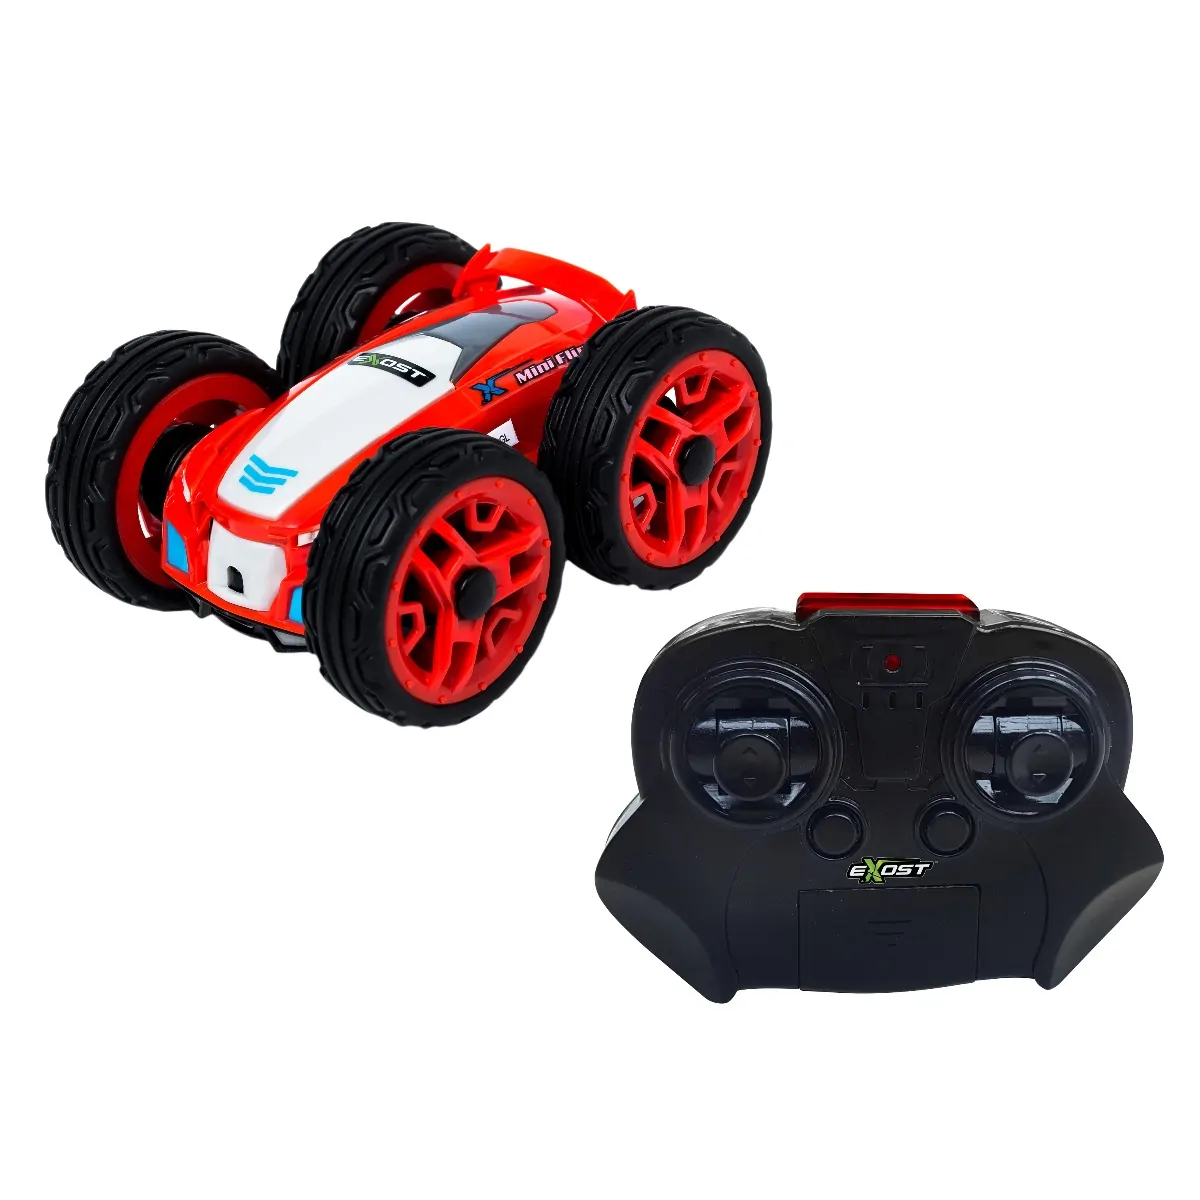 Discover our Exost RC Cars – Silverlit